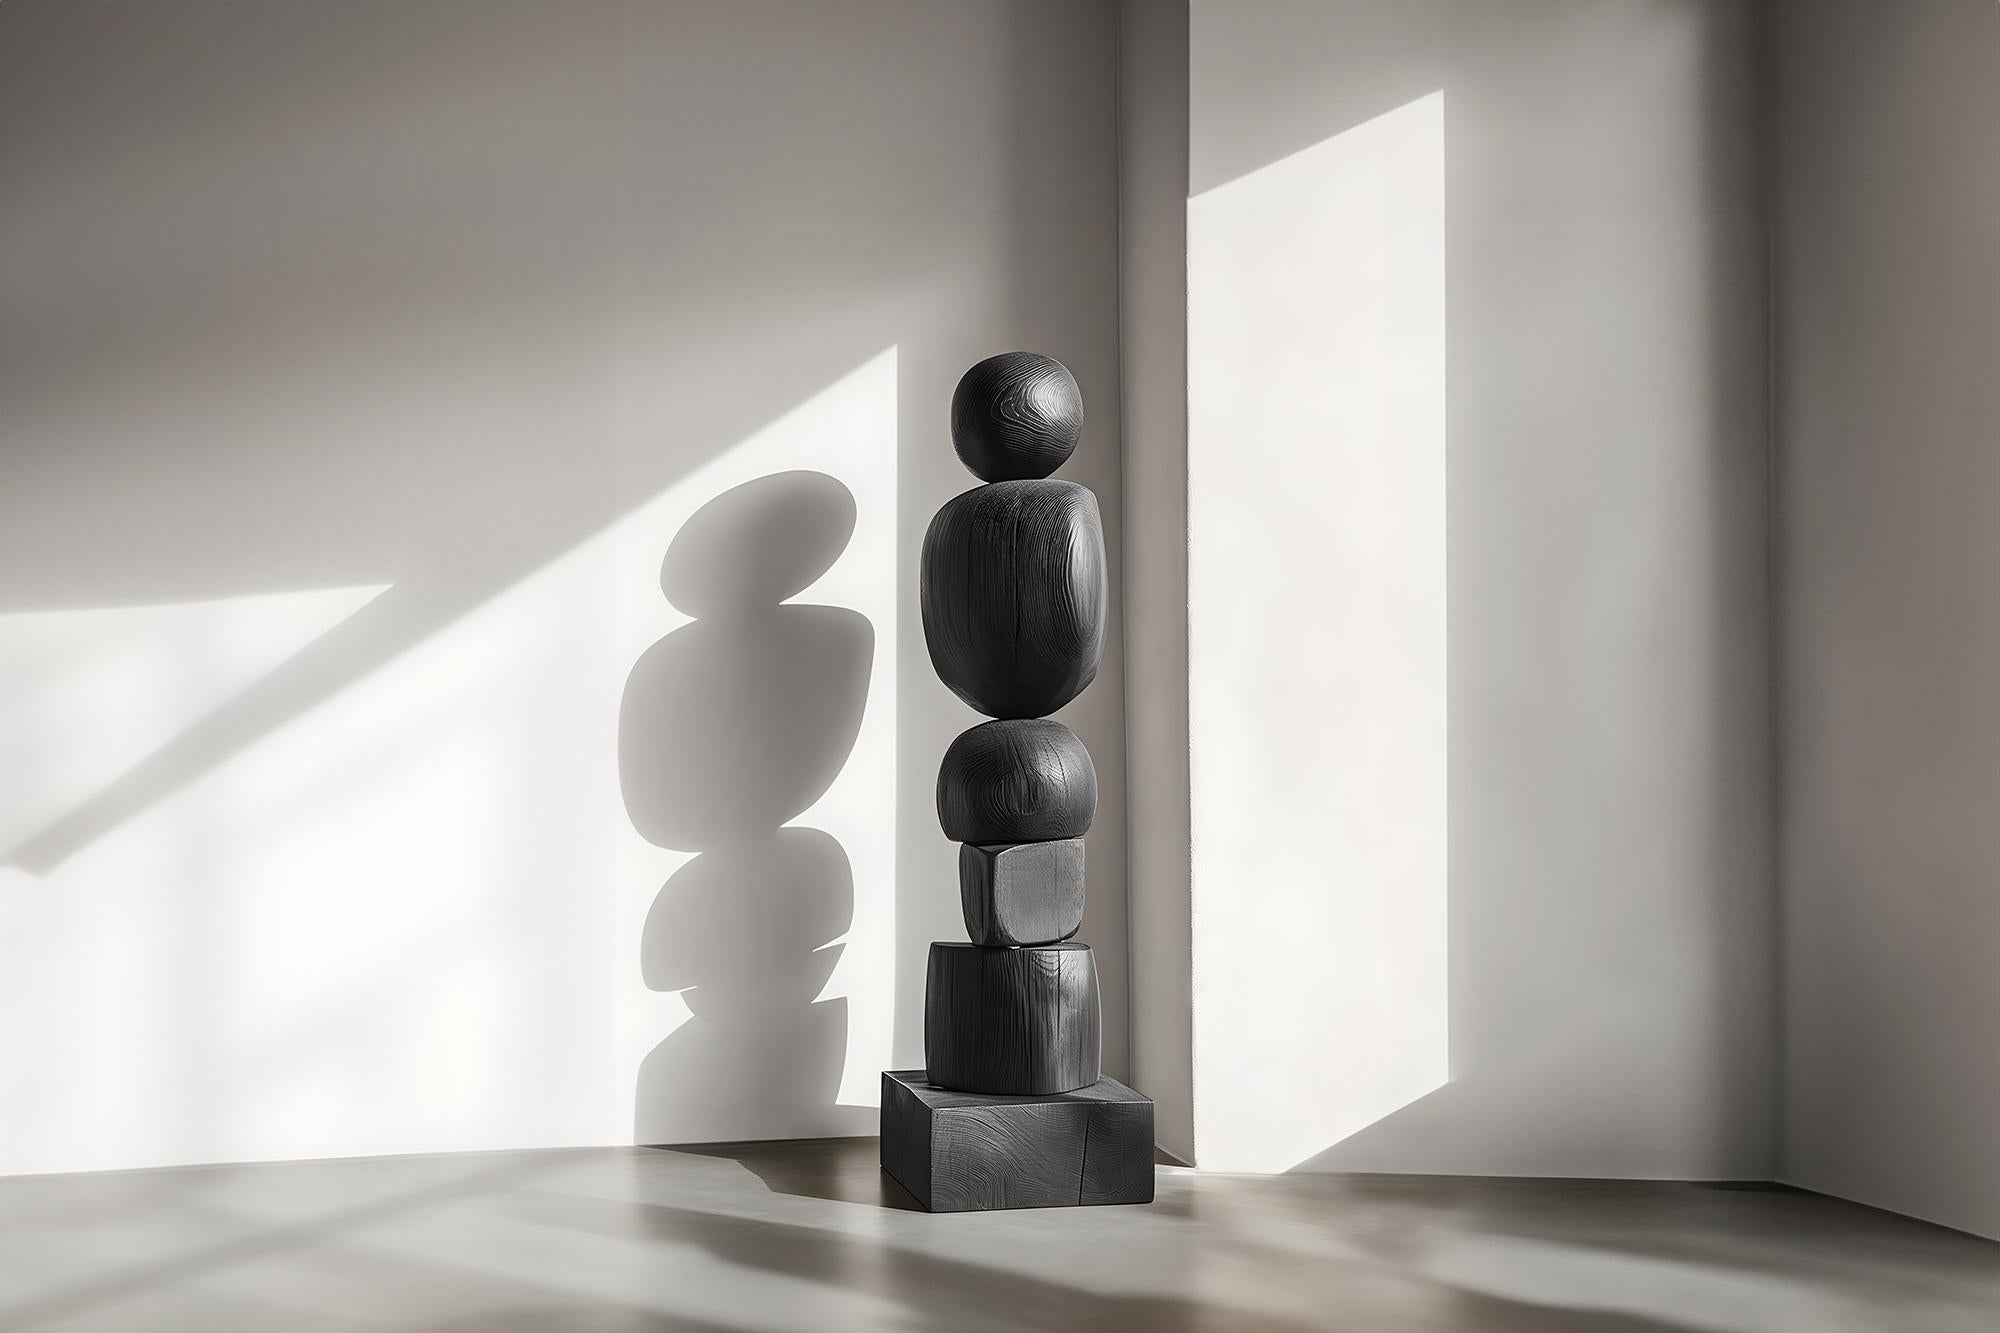 The Sleek Totem of Dark Elegance in Black Solid Wood, Still Stand No90
——

Joel Escalona's wooden standing sculptures are objects of raw beauty and serene grace. Each one is a testament to the power of the material, with smooth curves that flow into